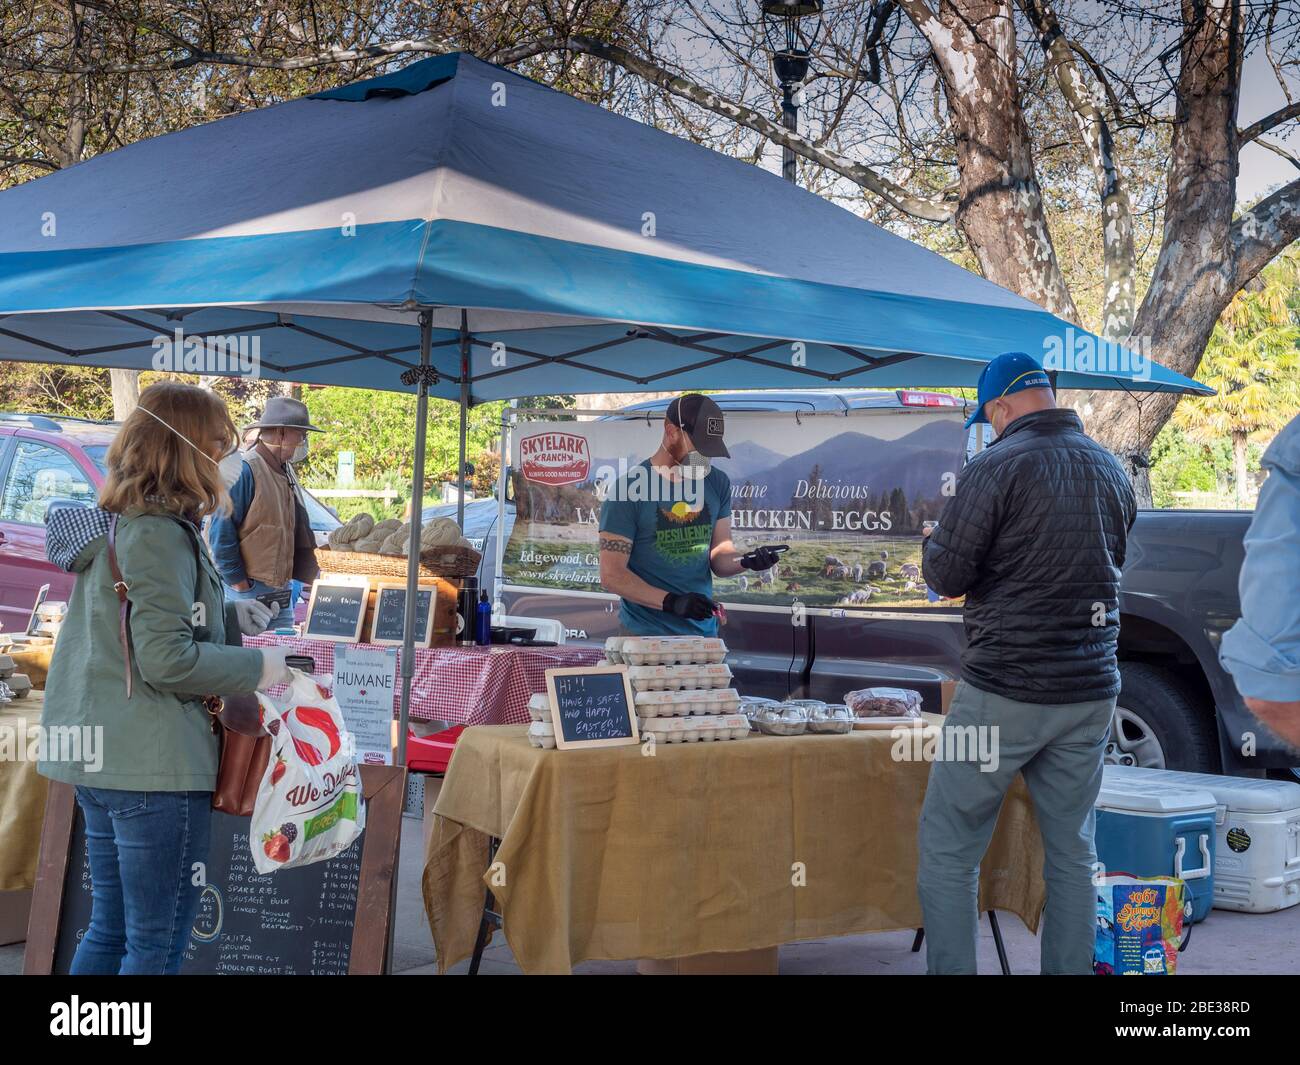 Davis, California, USA. March 11, 2020. The farmers market is still open despite the lockdown. The tents are  more spread out and only the vendors can touch the produce. Money and produce are handled by different people. Hand sanitizer are offered, and lmost everyone is wearing masks (some more fashionable than others). Stock Photo